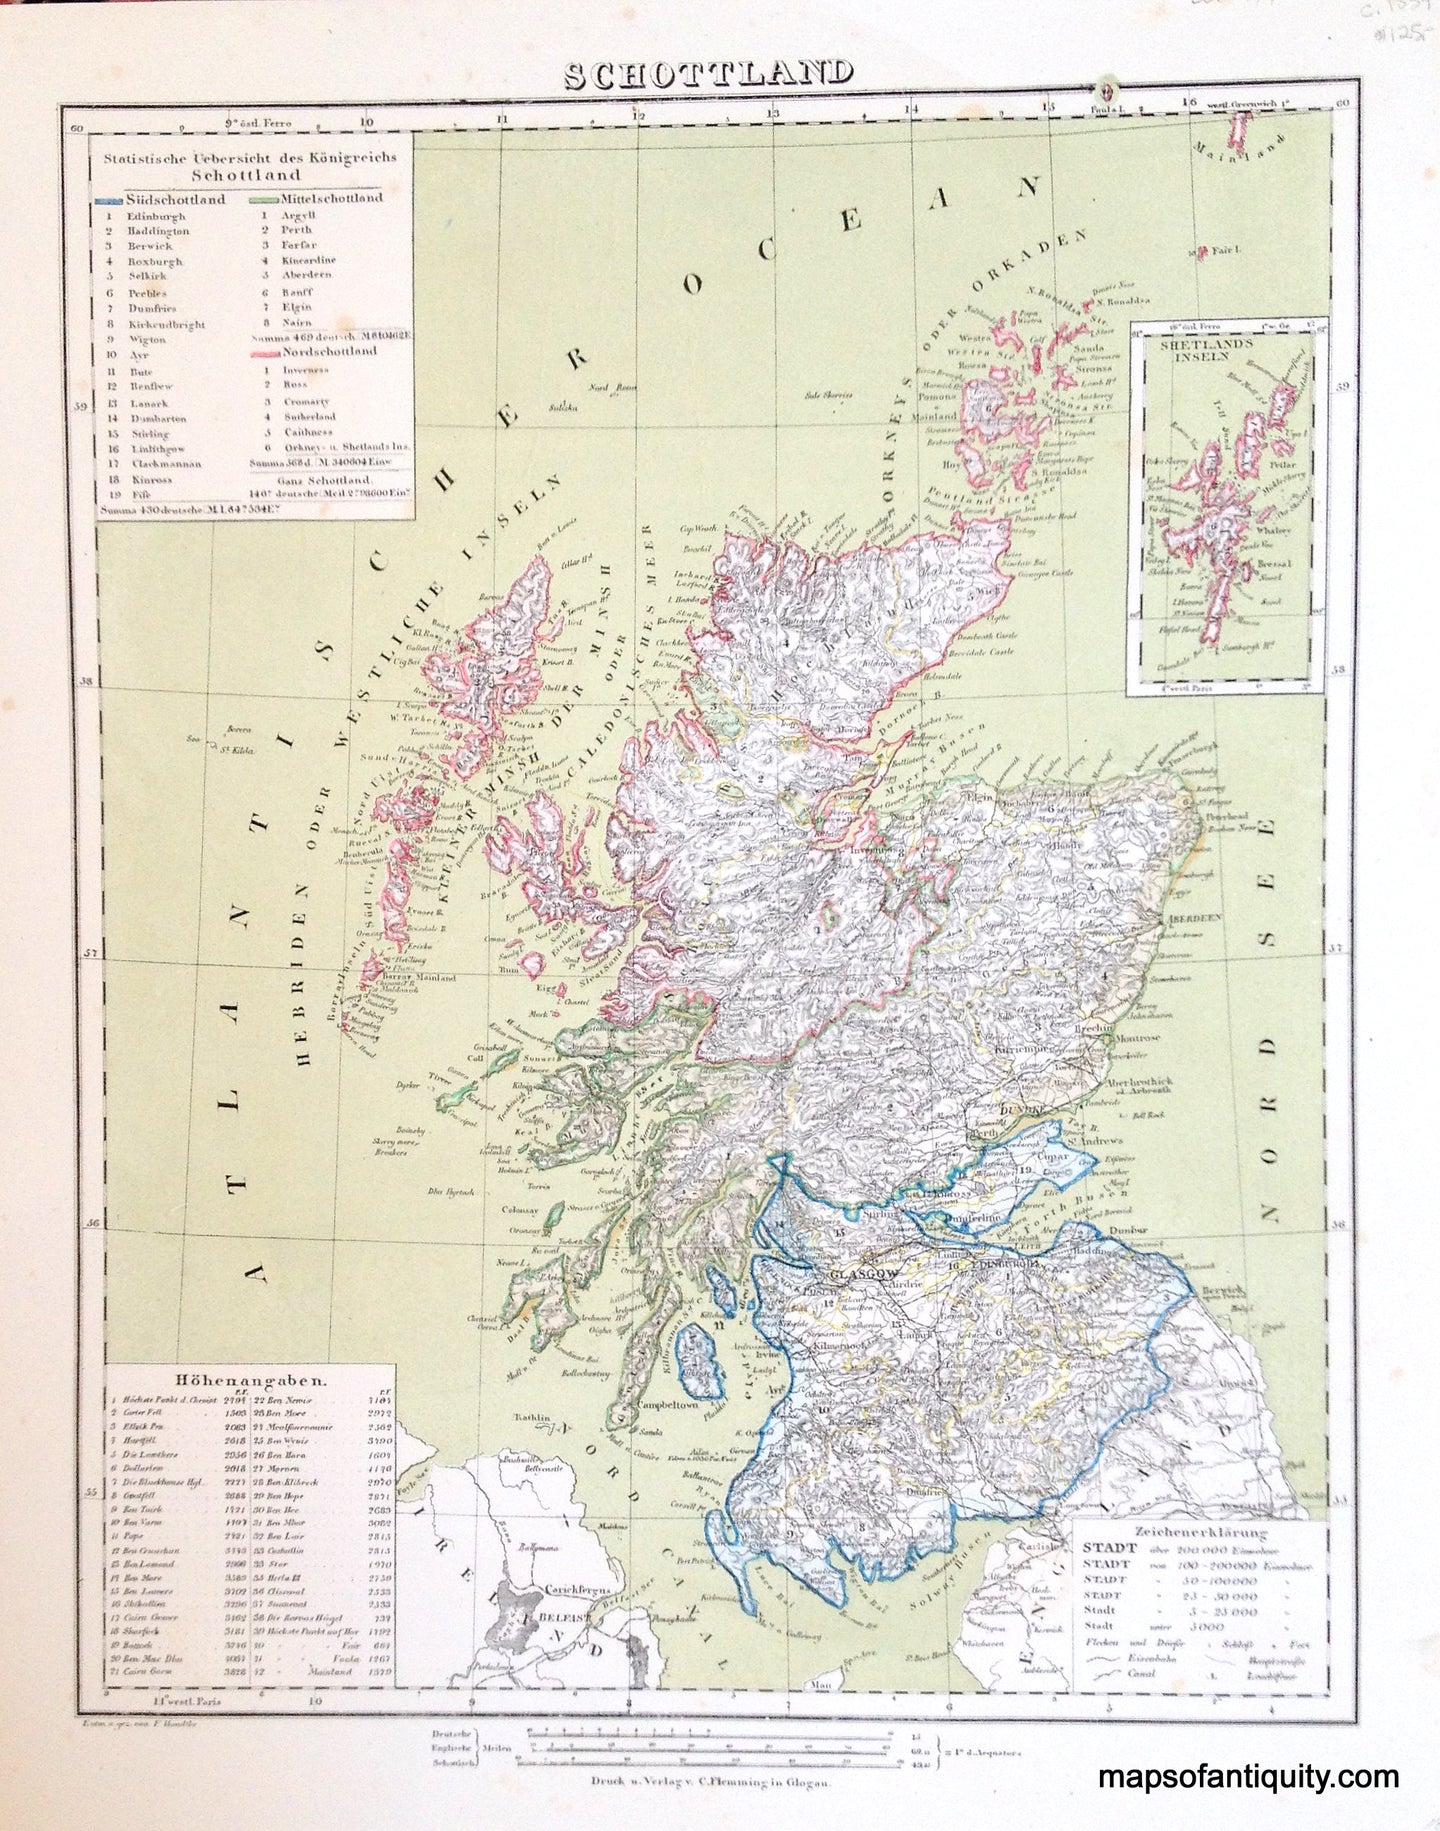 Antique-Hand-Colored-Map-Schottland-Scotland-Europe--c.-1859-Flemming-Maps-Of-Antiquity